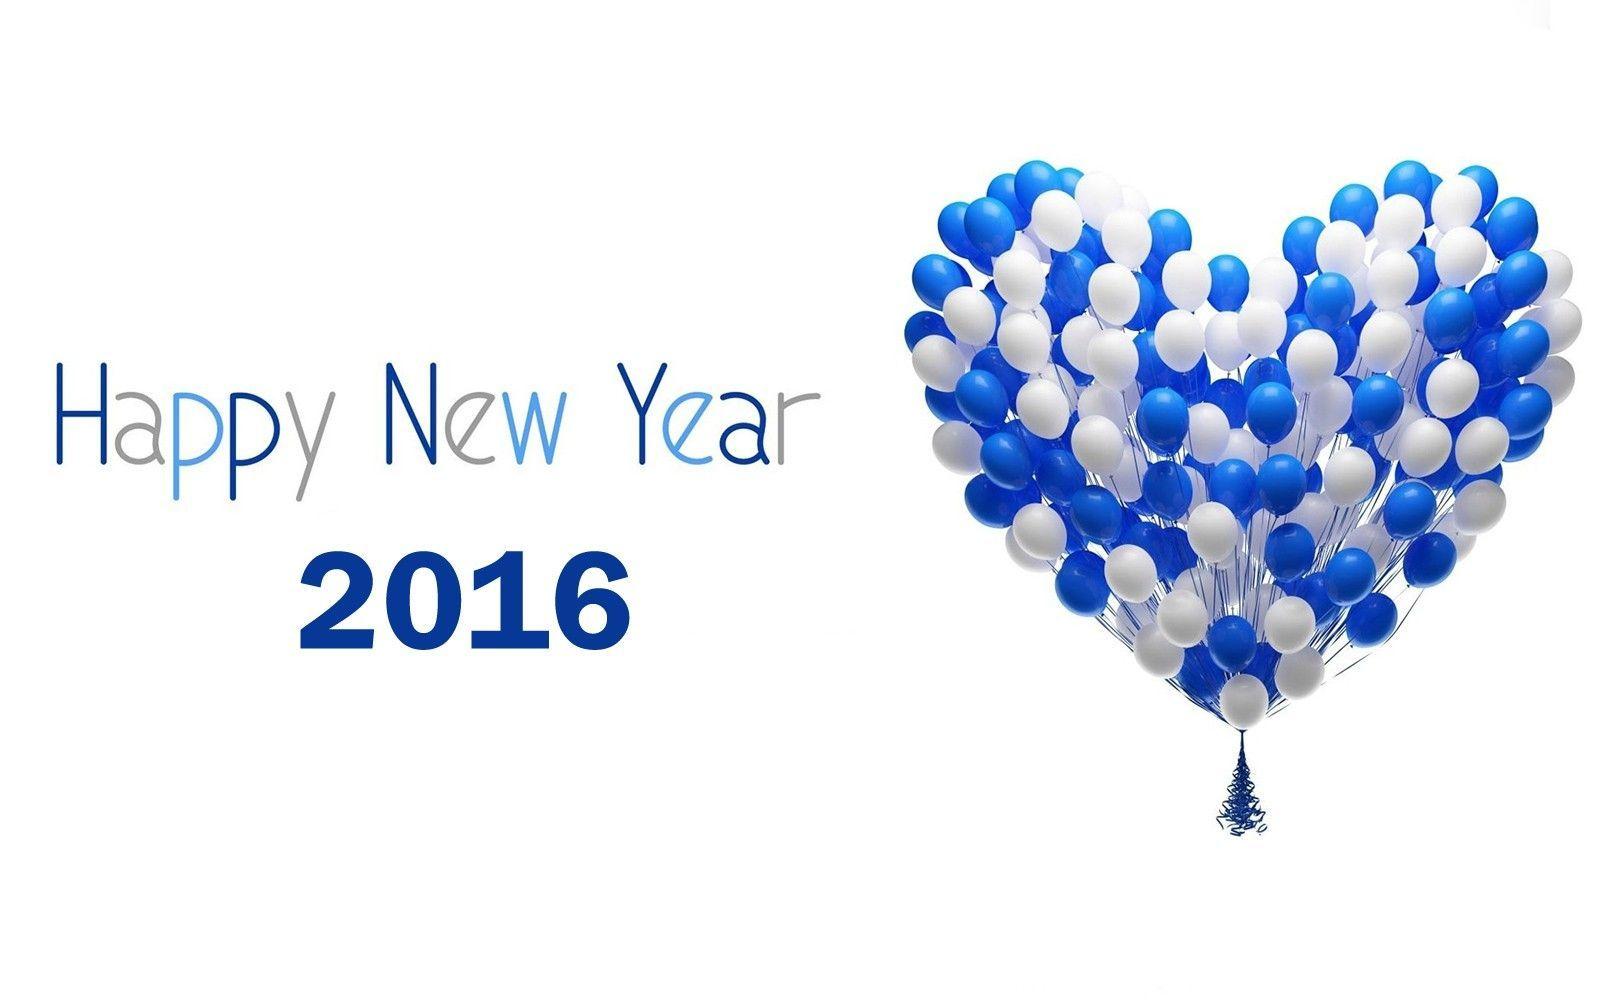 Happy New Year 2016 HD Wallpaper, Image Free Download